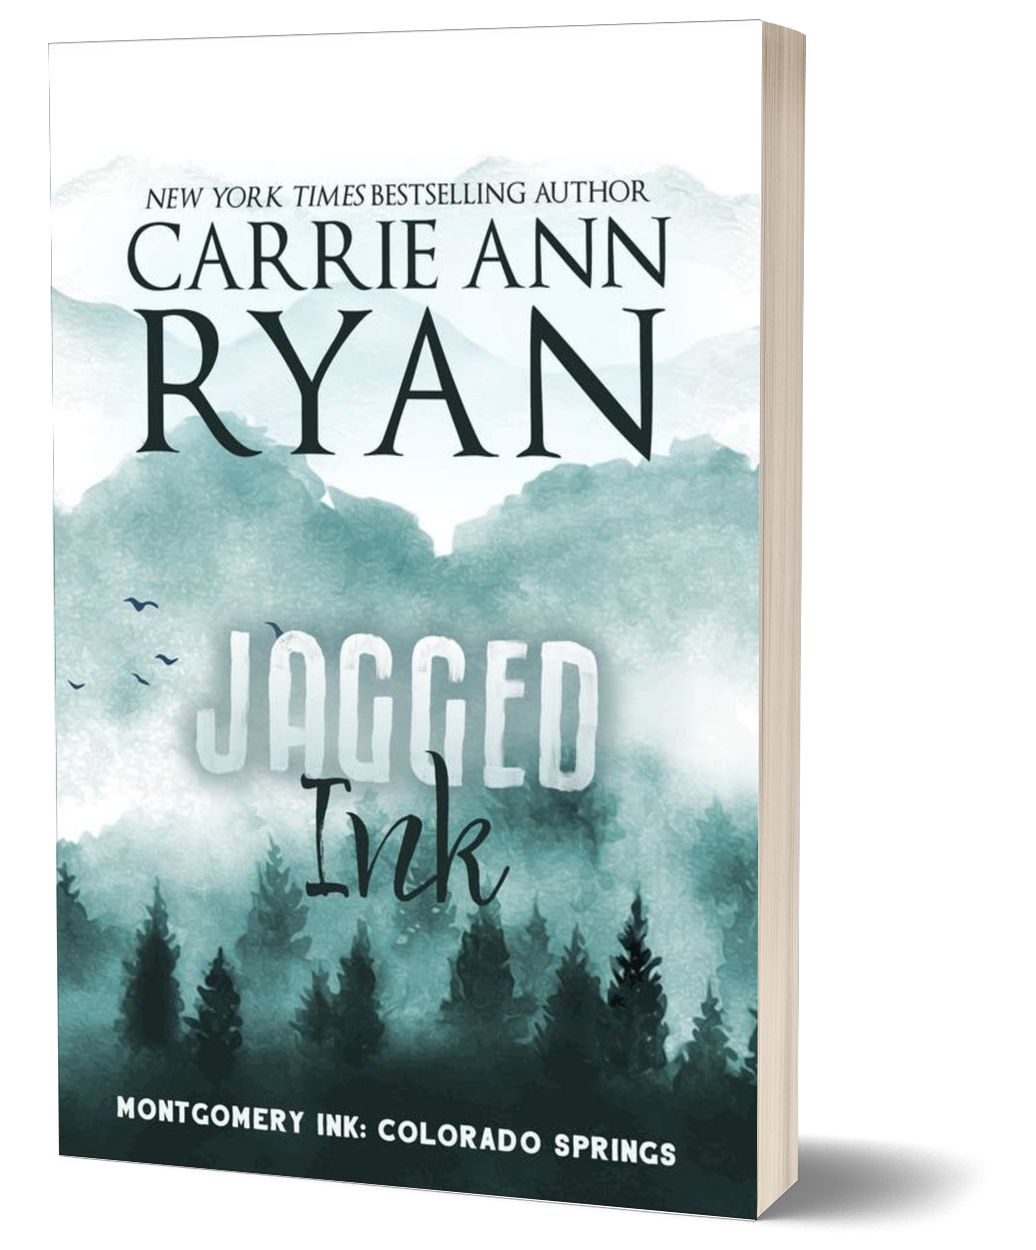 Jagged Ink - Special Edition Paperback